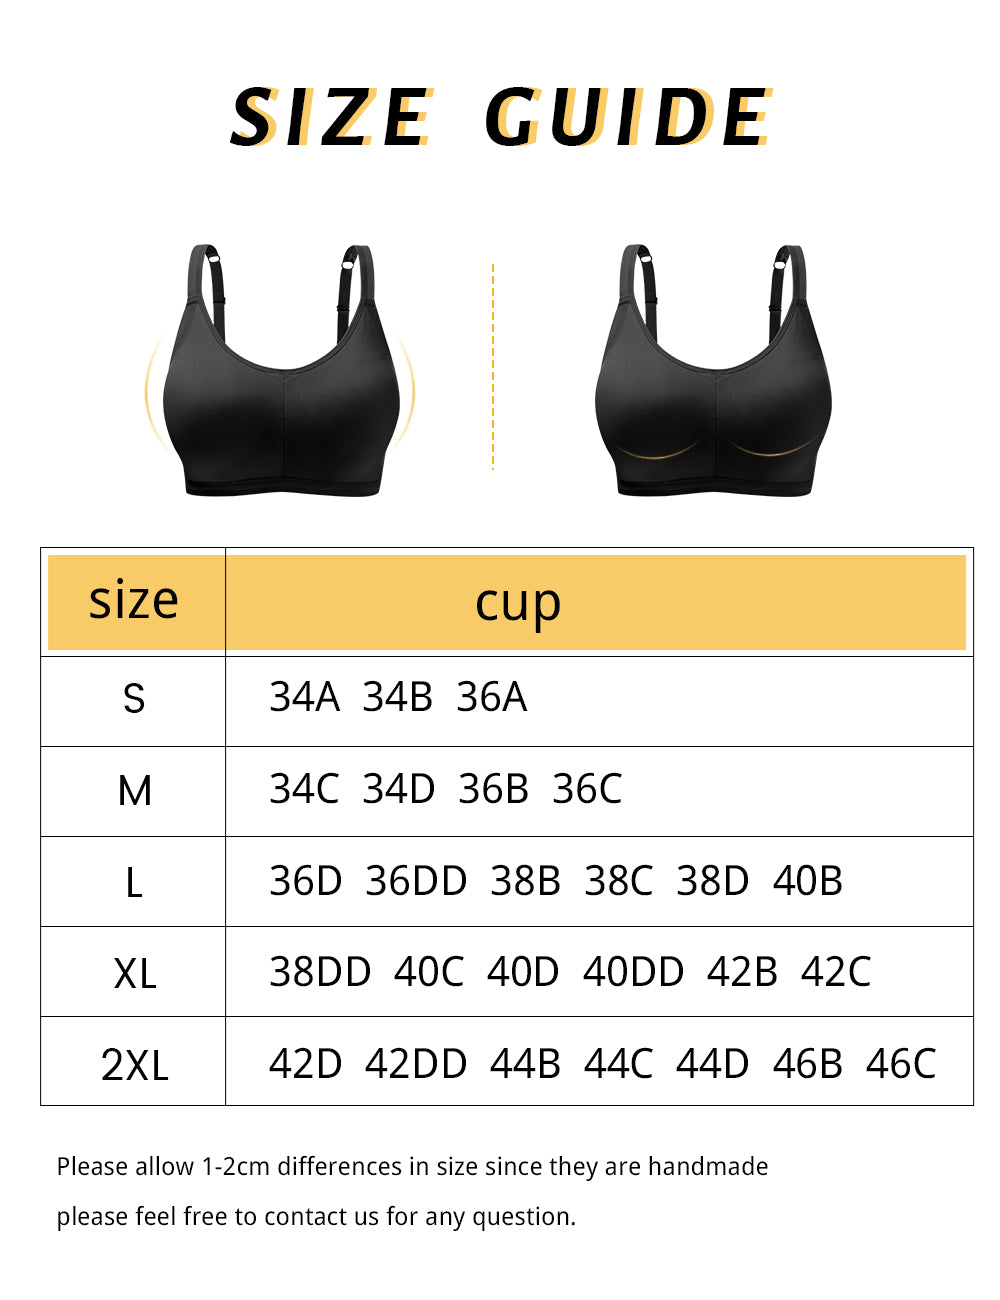 Woman's Adjustable Straps Full Coverage Seamless Sports Bra for Teenager  Pack of (3) multicolor